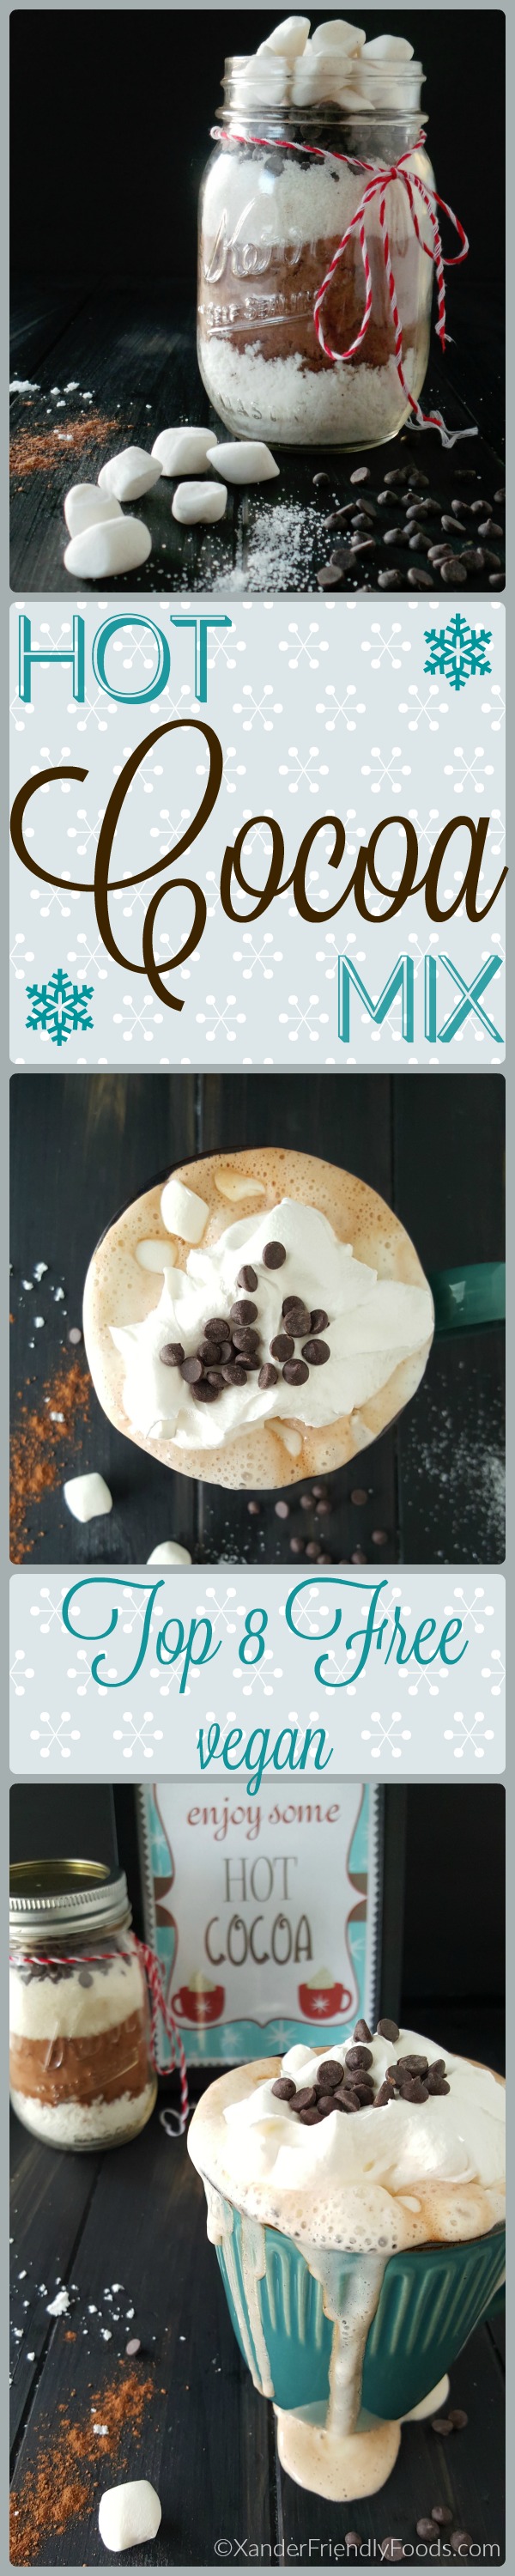 Deliciously dairy-free Hot Cocoa mix, perfect for 1 mug or 10. Top 8 free & vegan